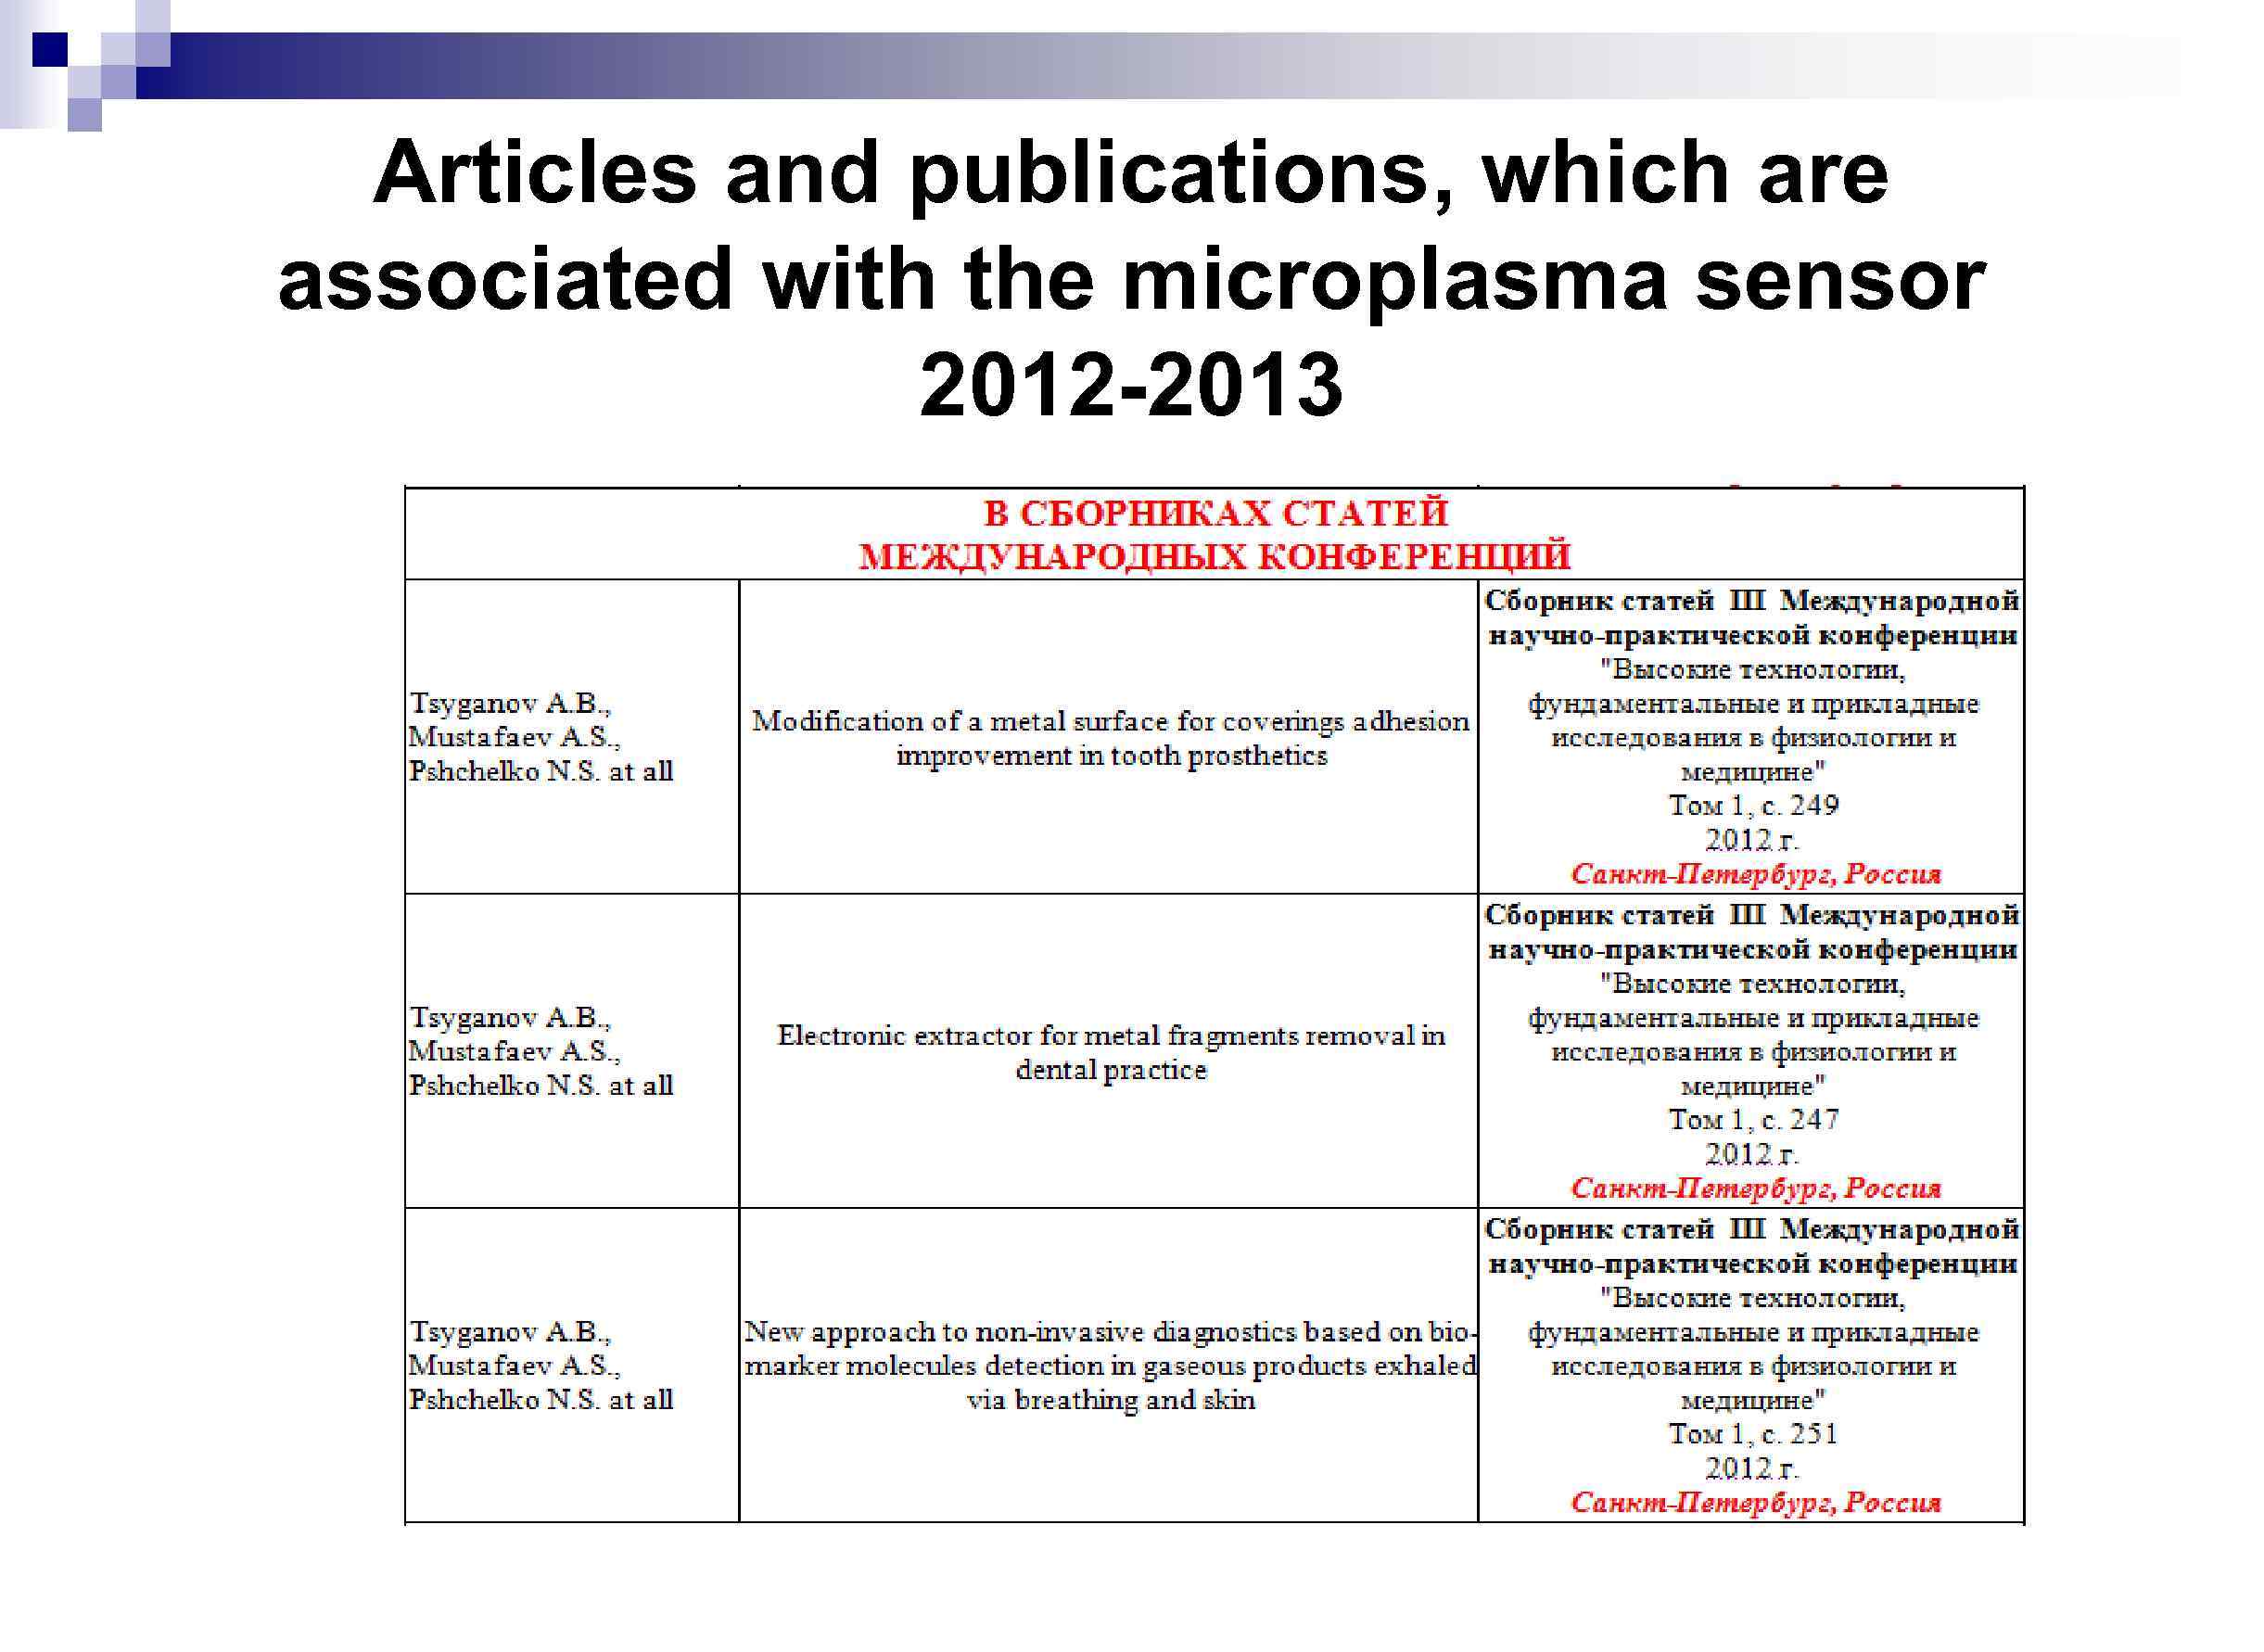 Articles and publications, which are associated with the microplasma sensor 2012 -2013 